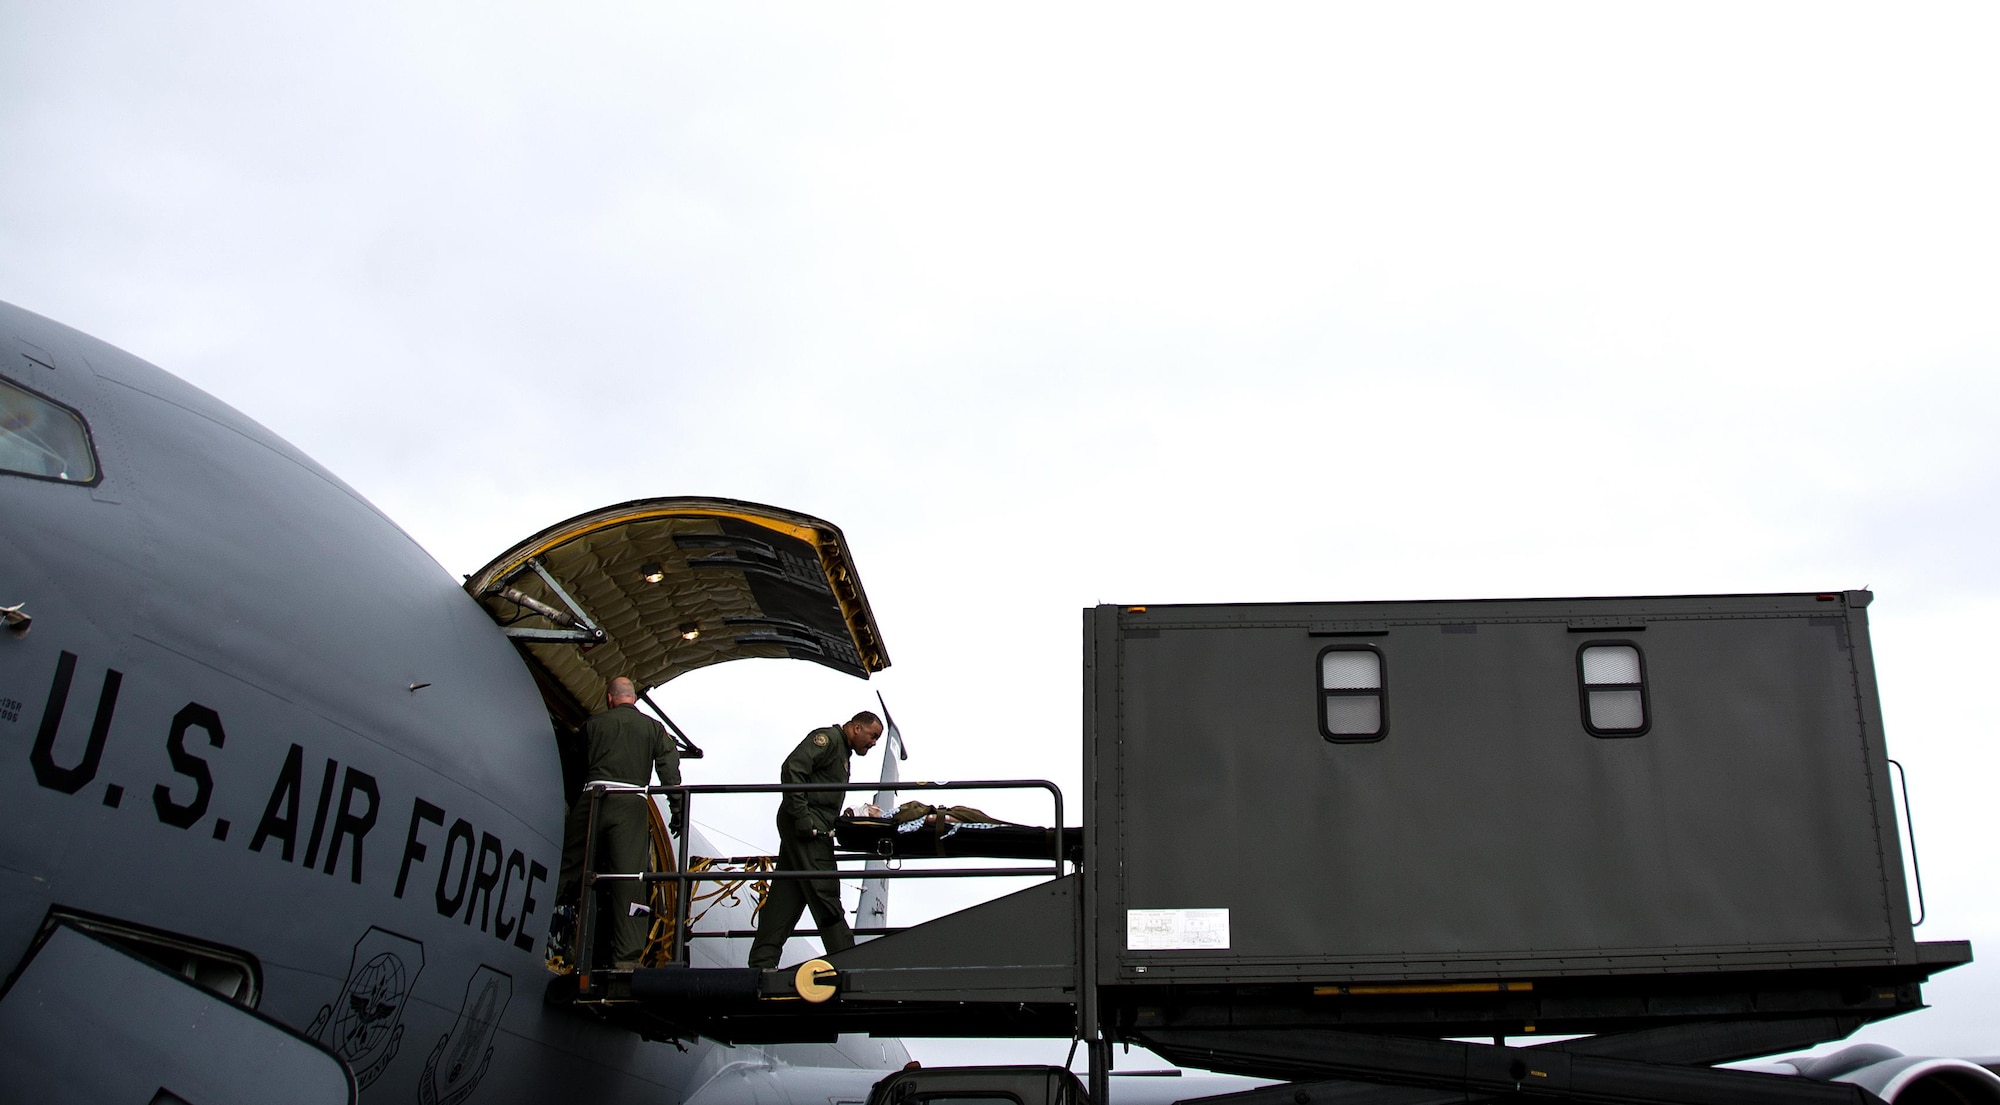 Master Sgt. Rard Perkins, 911th Operations Group aircrew trainer, offloads a patient onto a specialized medical K loader during Patriot Delta at Travis Air Force Base, Calif. on March 24, 2017. Patriot Delta brought in aeromedical evacuations squadrons from the from the 911th Airlift Wing at Pittsburgh Air Reserve Station, Penn., the 908th AW at Maxwell Air Force Base, Miss.; the 932d Airlift Wing at Scott AFB, Ill.; and the 349th Air Mobility Wing at Travis AFB. (U.S. Air Force photo by Staff Sgt. Daniel Phelps)